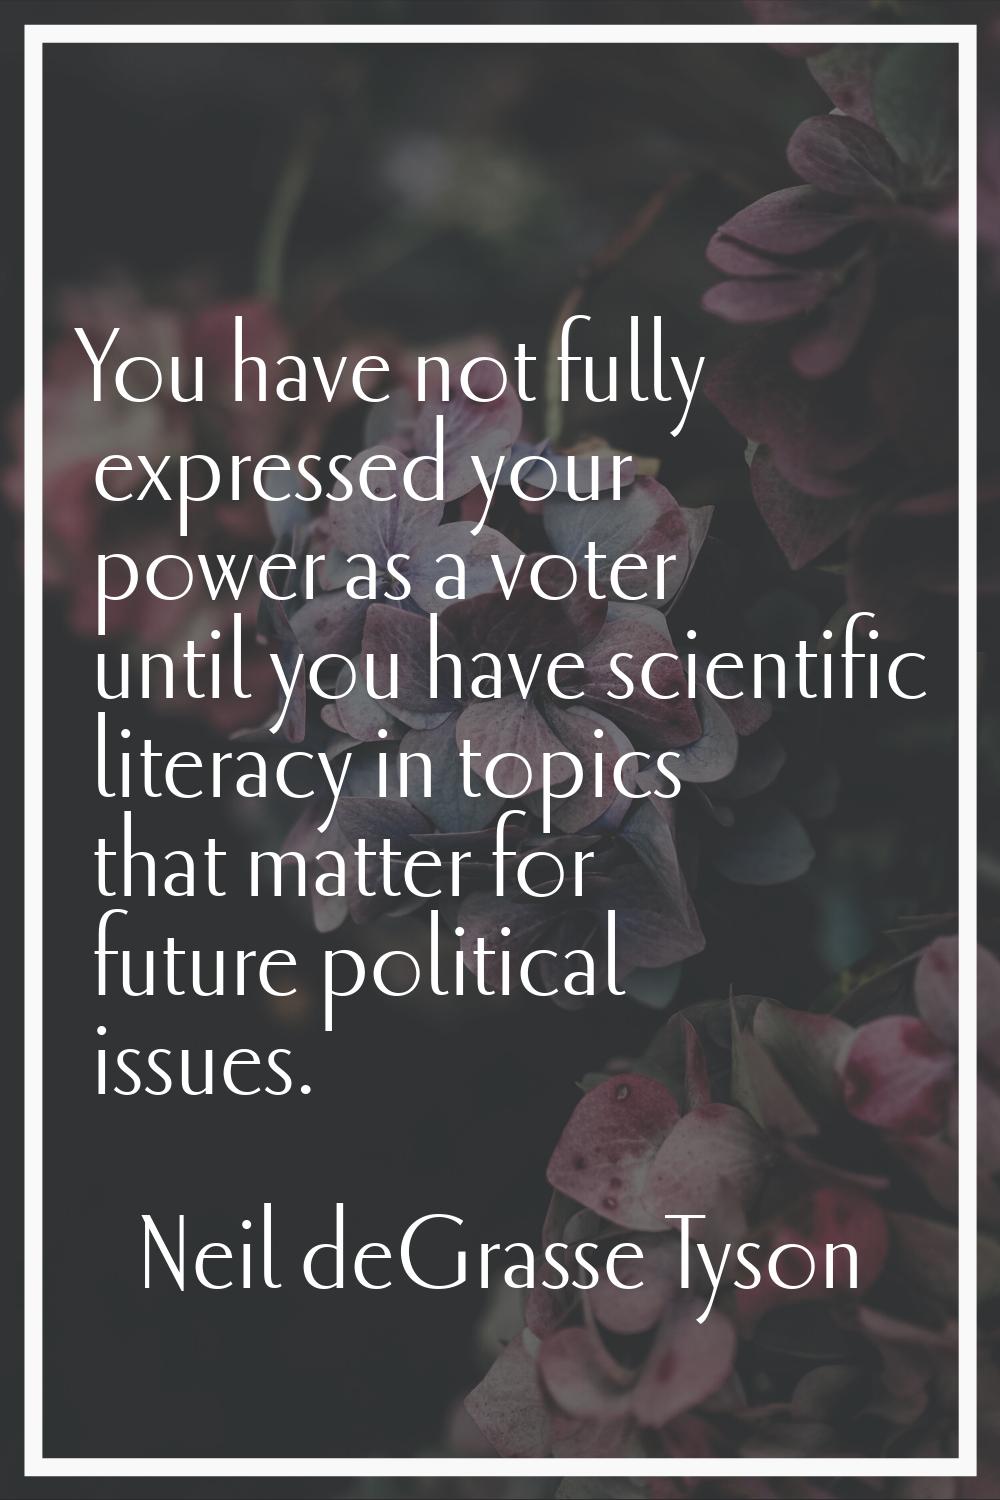 You have not fully expressed your power as a voter until you have scientific literacy in topics tha